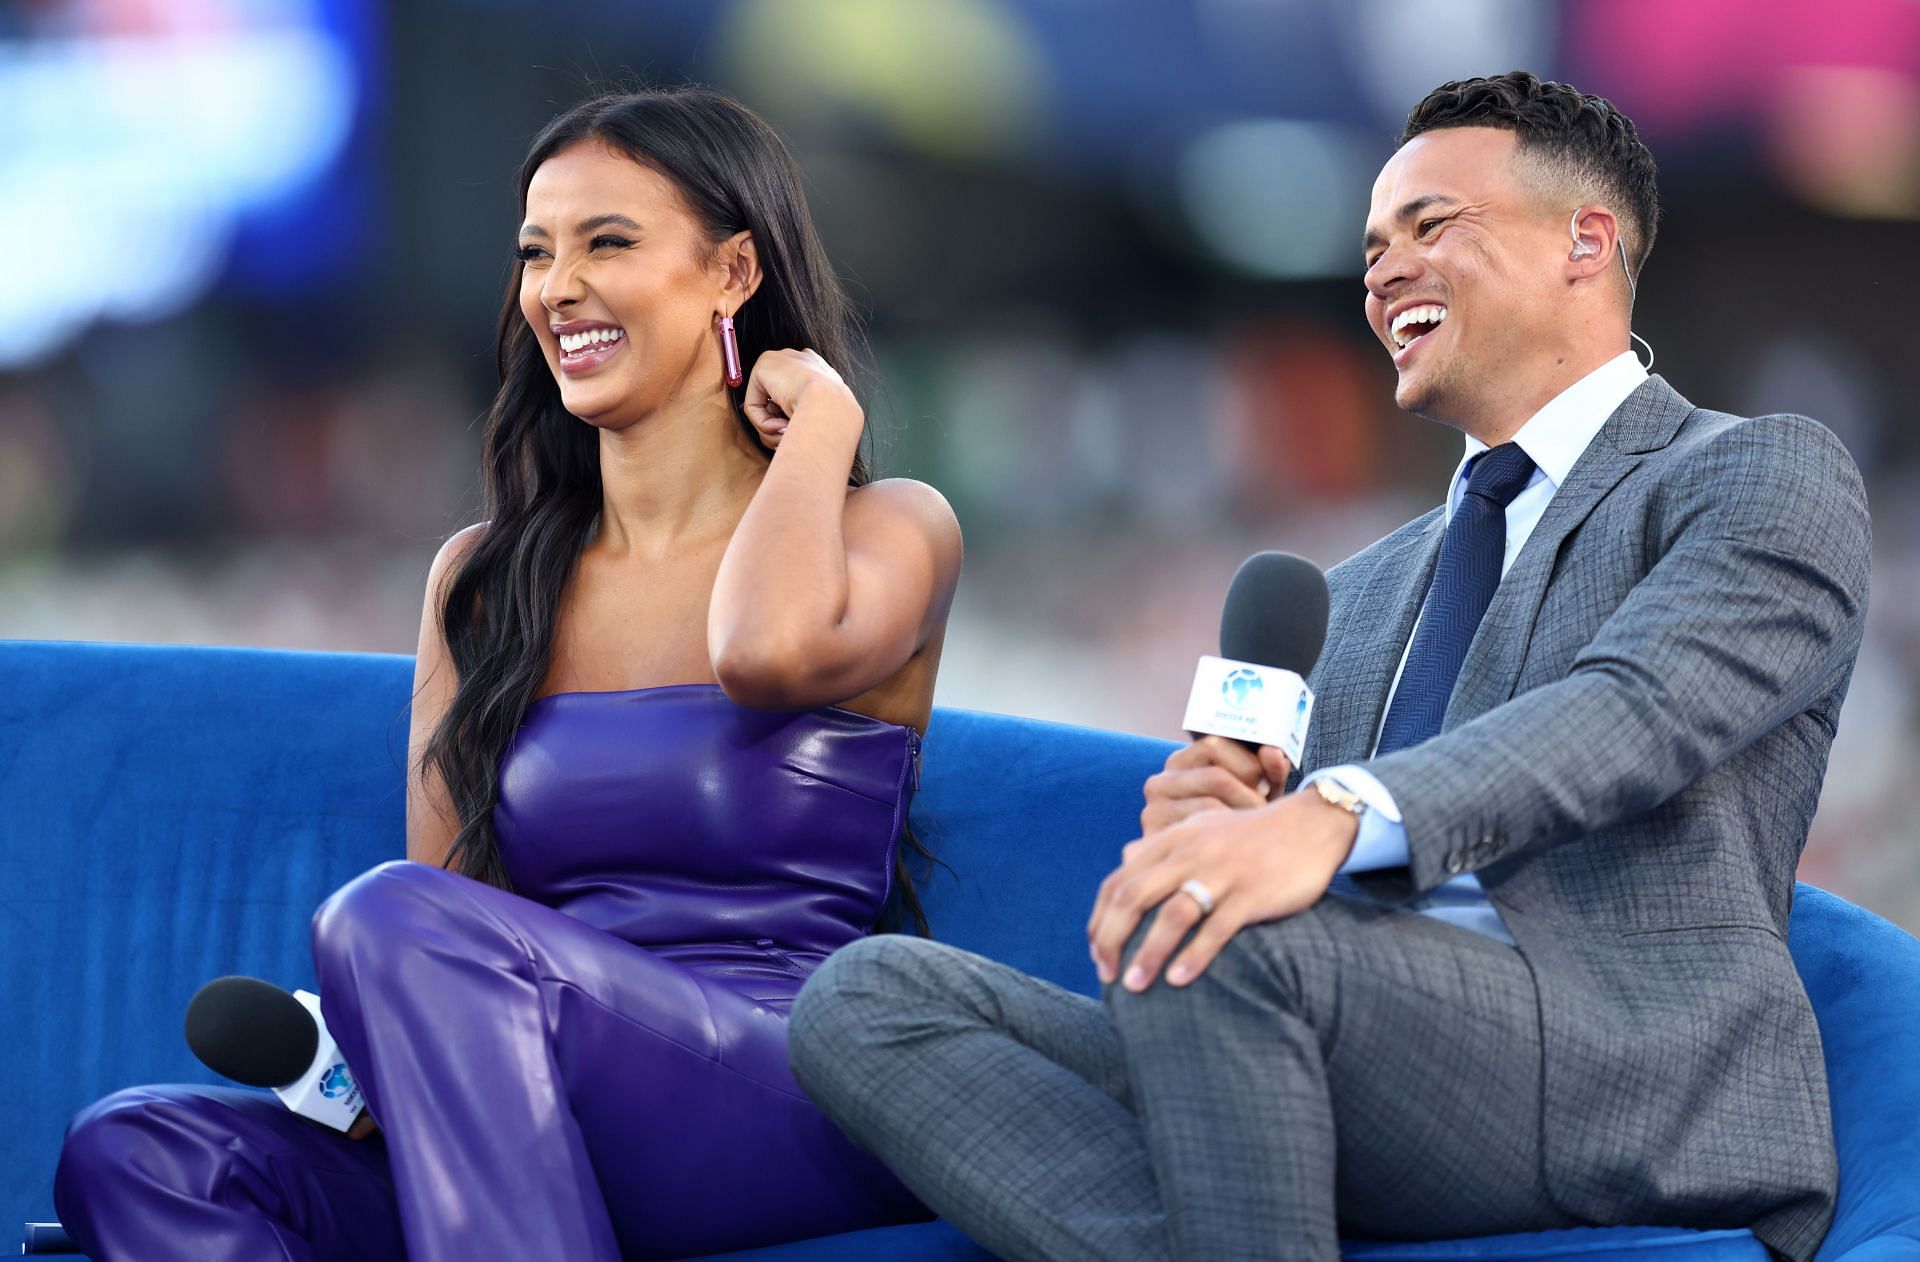 Ben Simmons and Maya Jama end their engagement